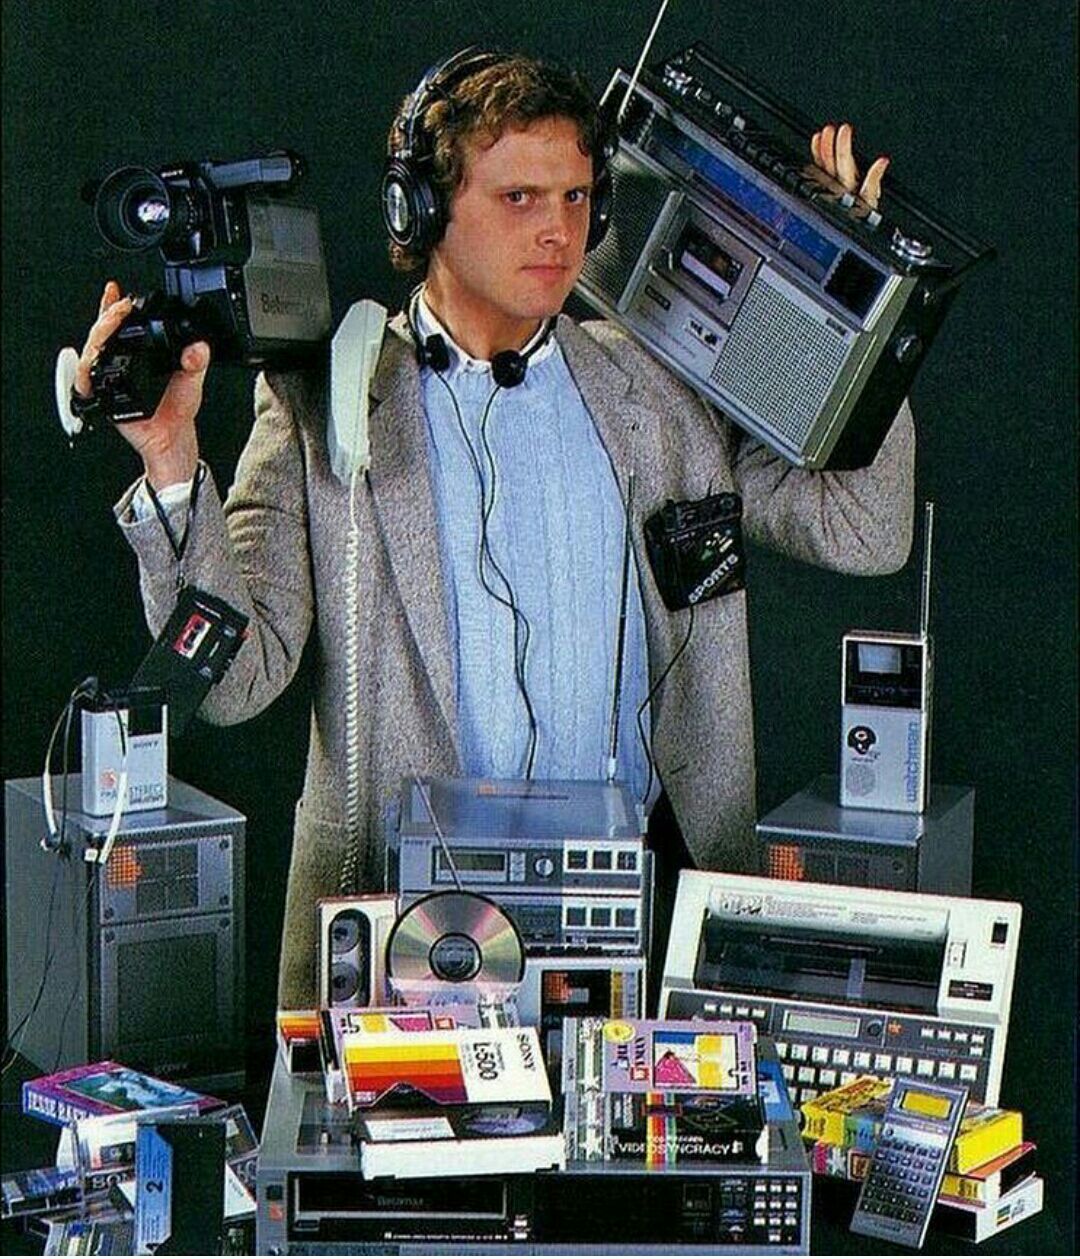 All the stuff that you can see in this picture is now provided on a tiny device that fits in your pocket.